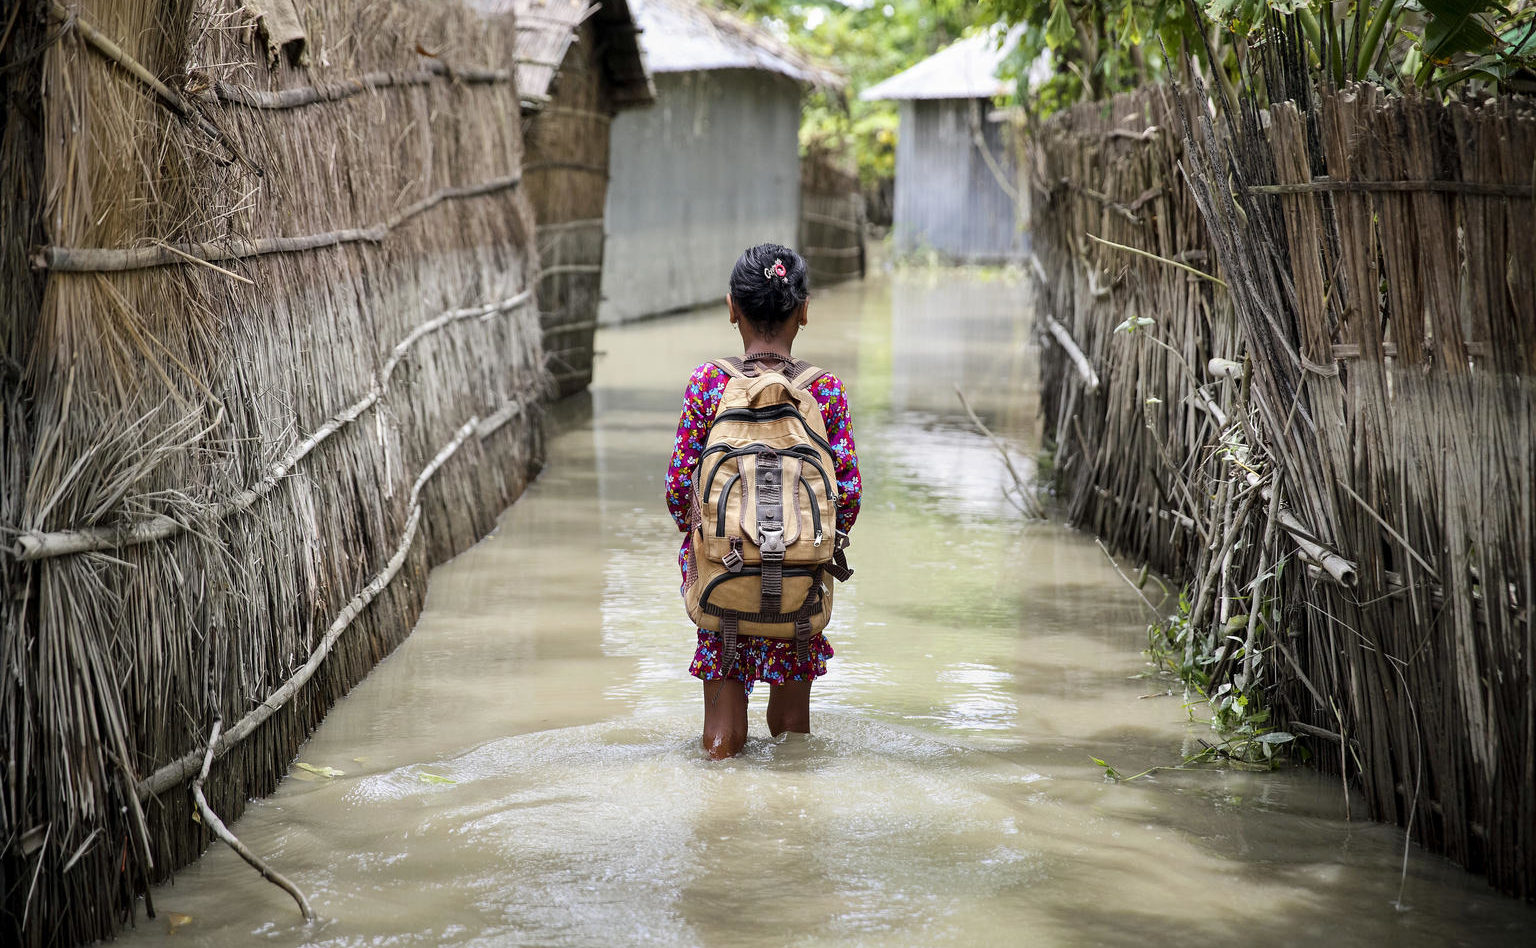 A child wades through water on her way to school in Bangladesh. © UNICEF/Akash